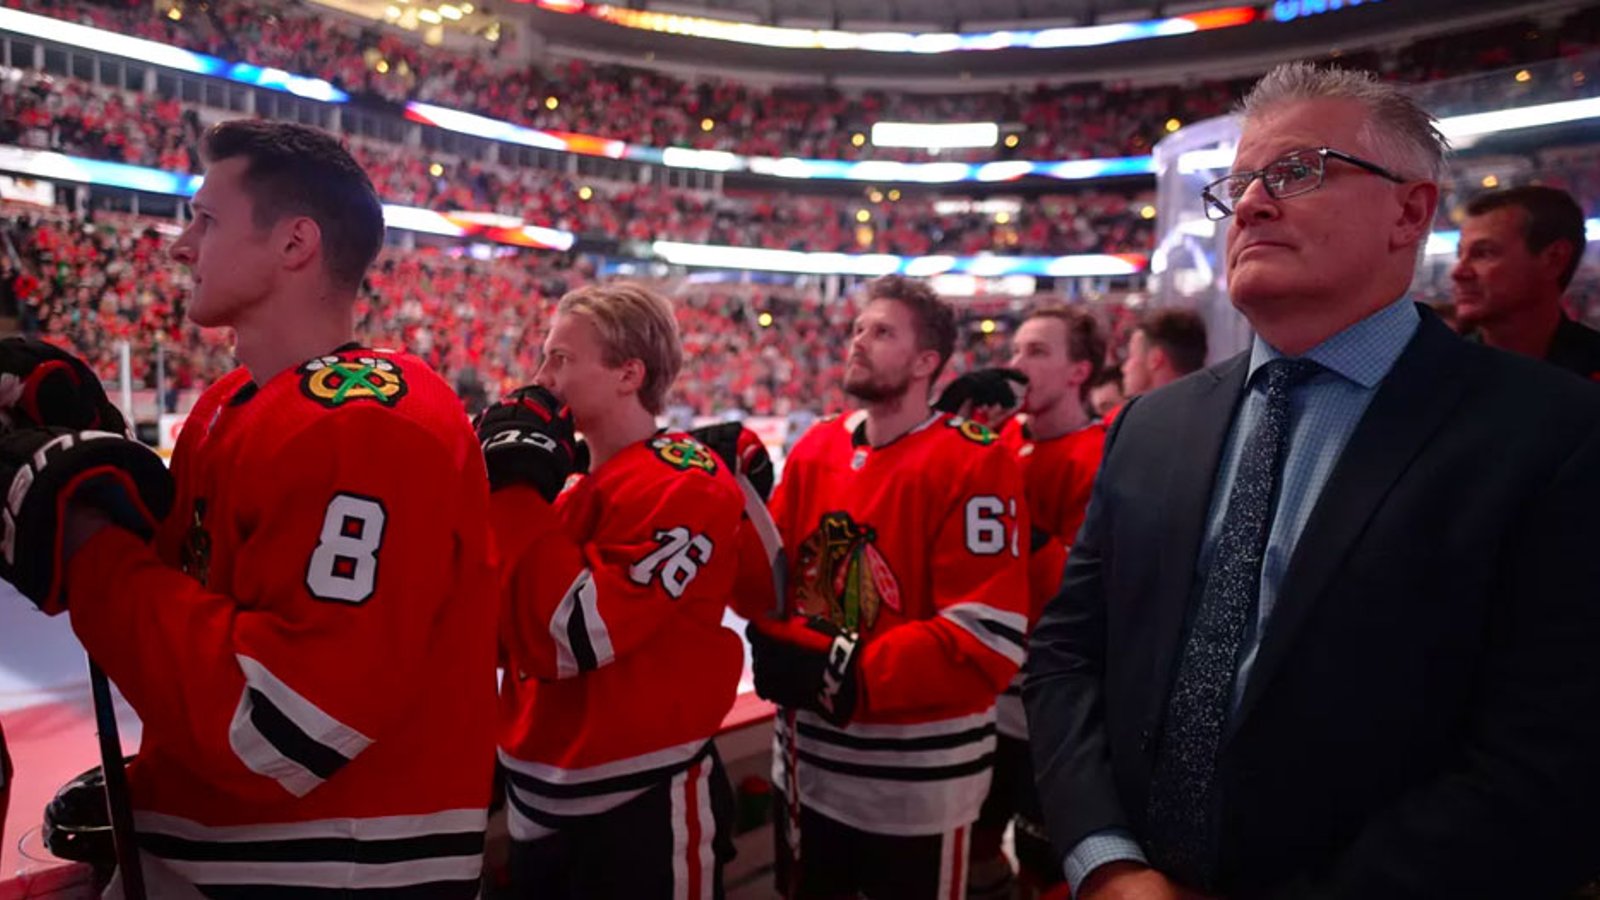 Marc Crawford's suspension lifted by Blackhawks